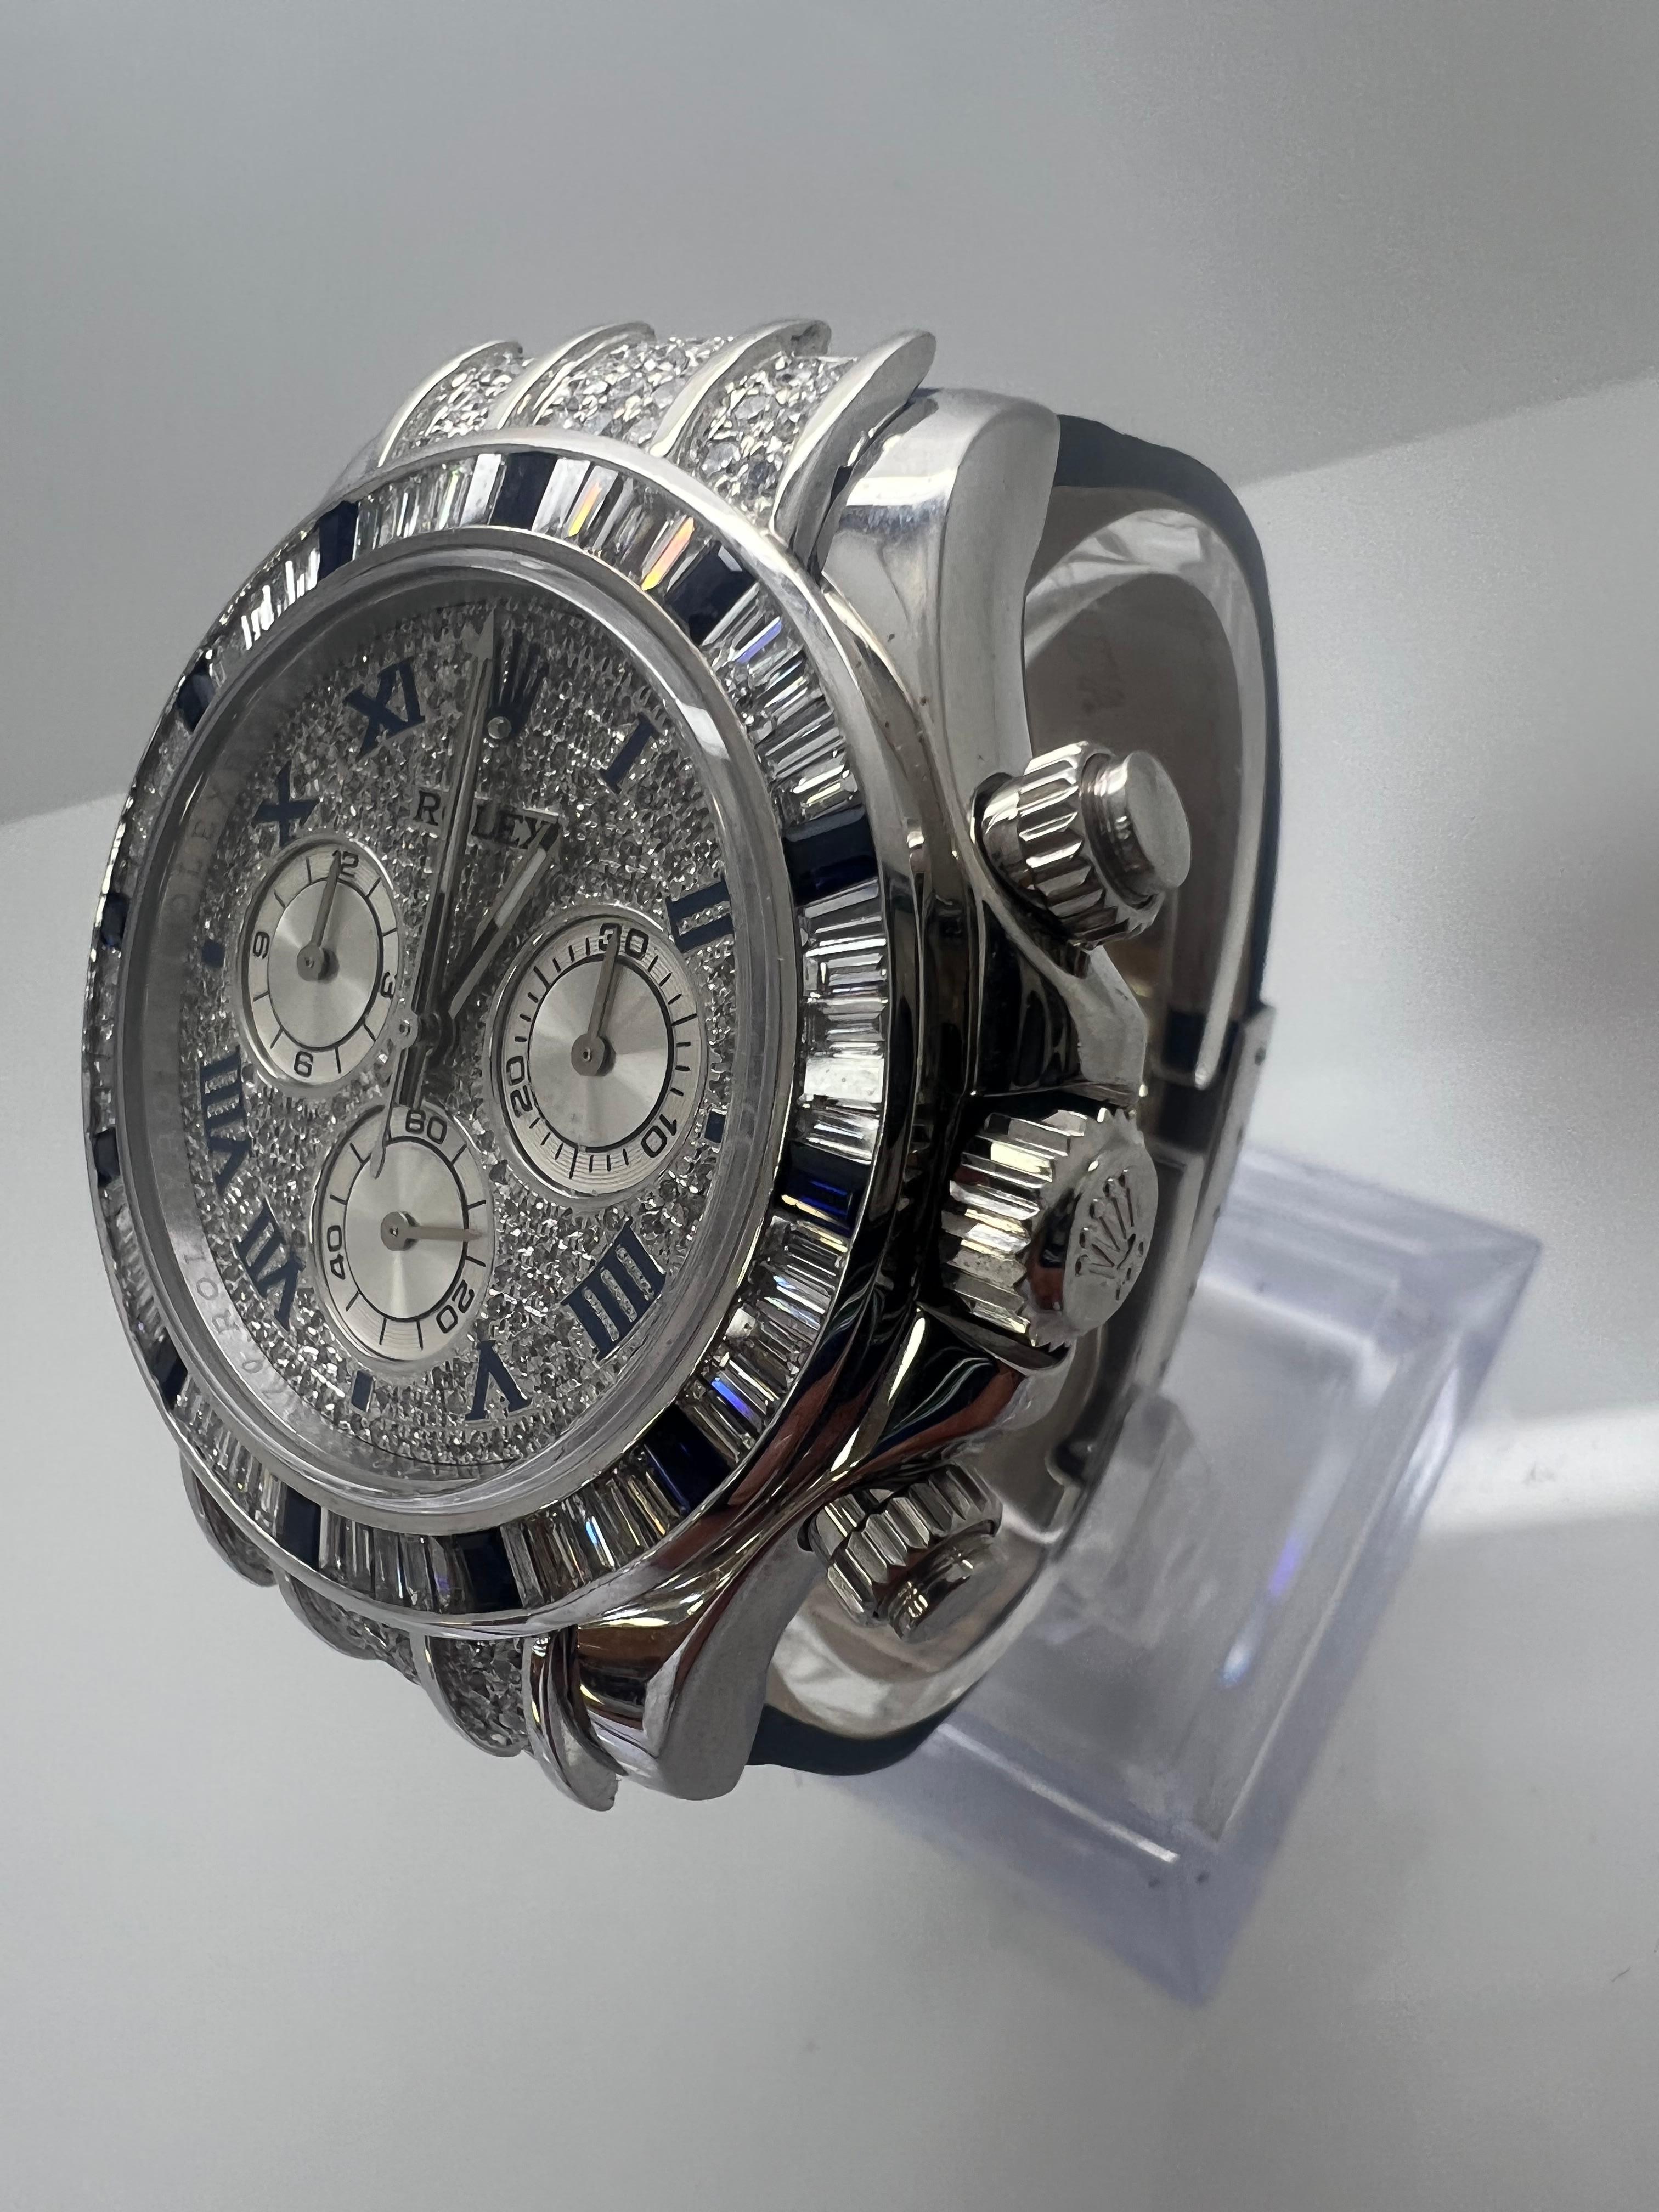 Rolex Daytona Platinum Diamond Men's Watch

all original Rolex parts except custom Diamond dial and diamonds on case

excellent condition

comes with original box and paperwork

shop with confidence
